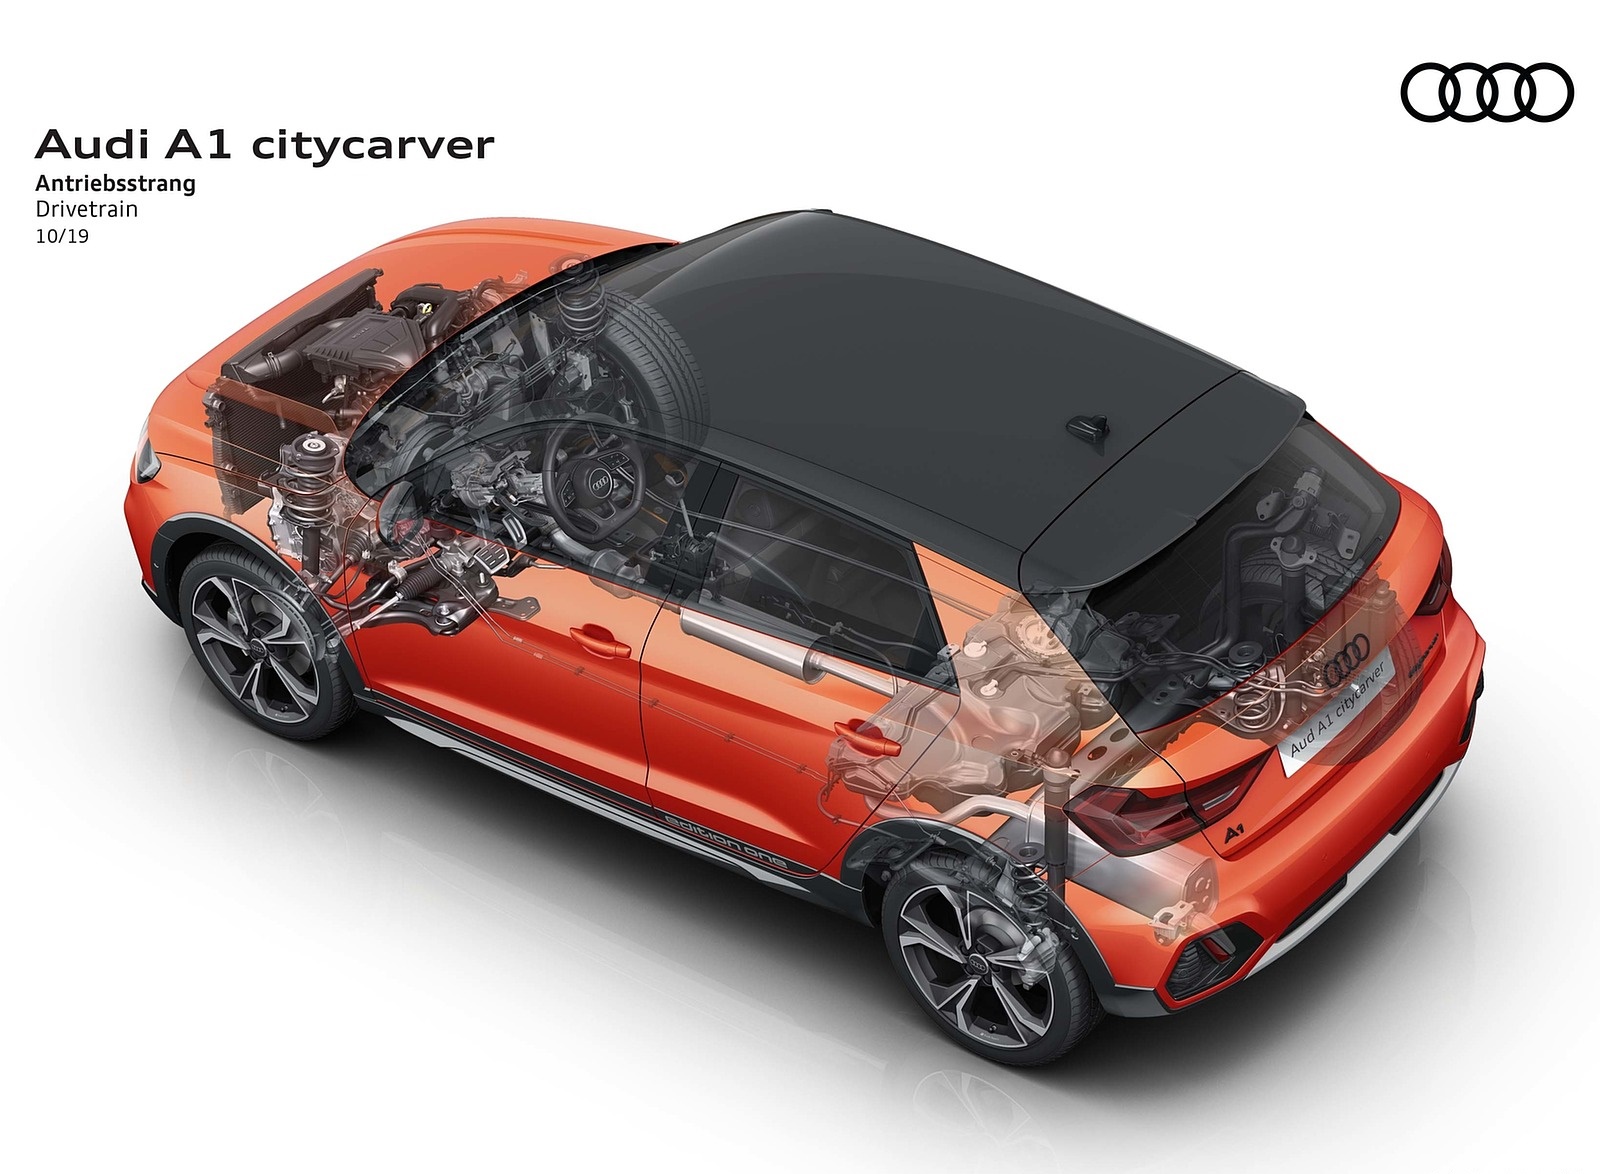 2020 Audi A1 Citycarver Drivetrain Wallpapers #60 of 97